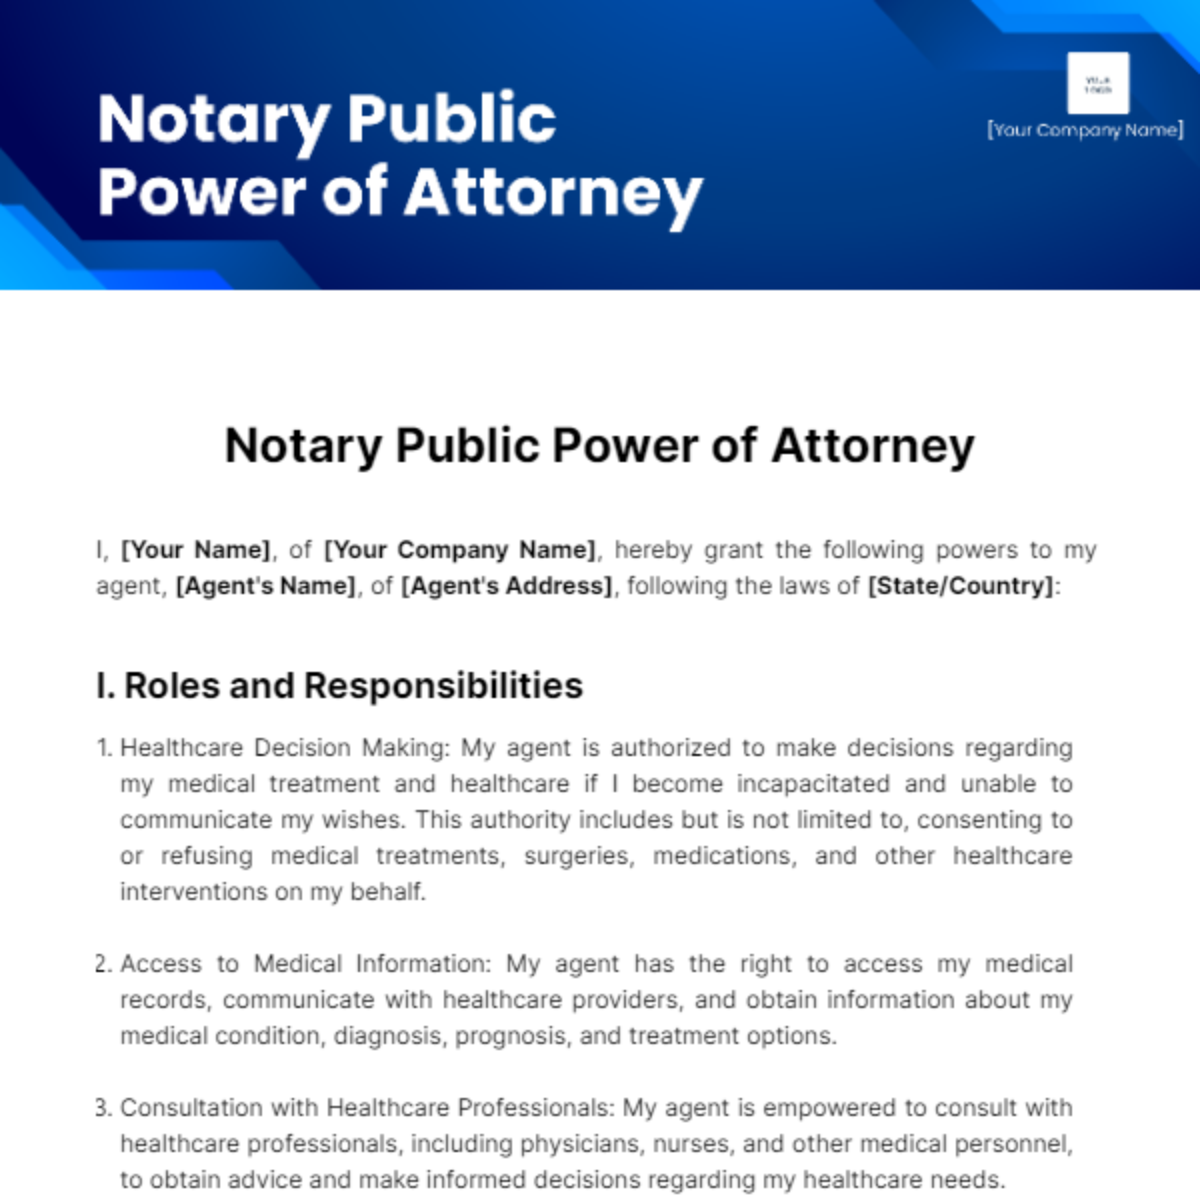 Notary Public Power of Attorney Template